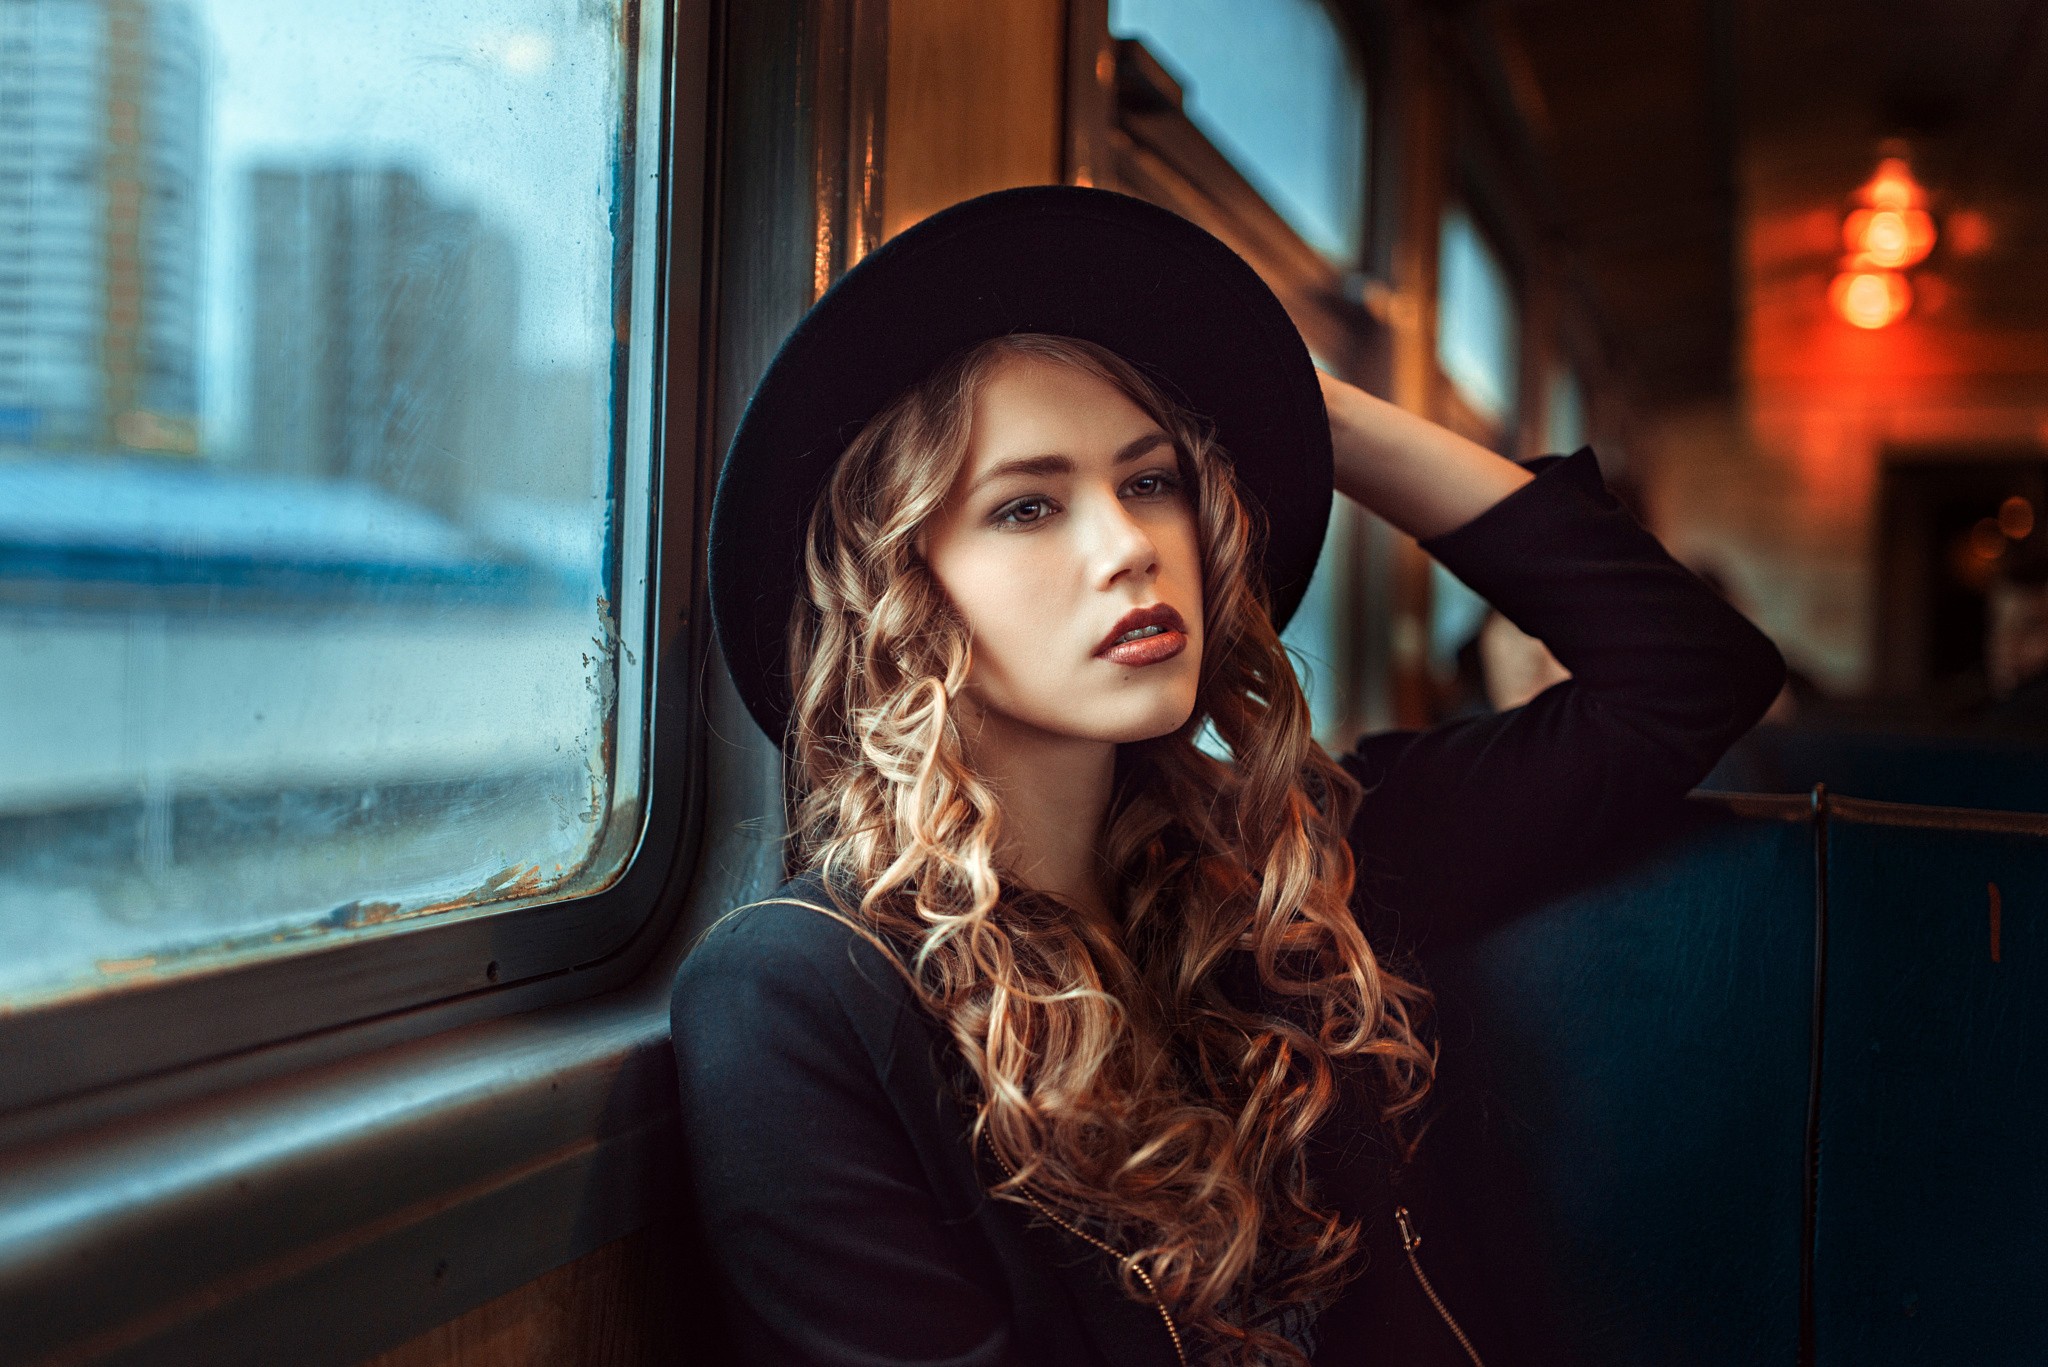 Women Portrait Blonde Women With Hats Black Clothing Hazel Eyes Curly Hair Diffused Looking Into The 2048x1367